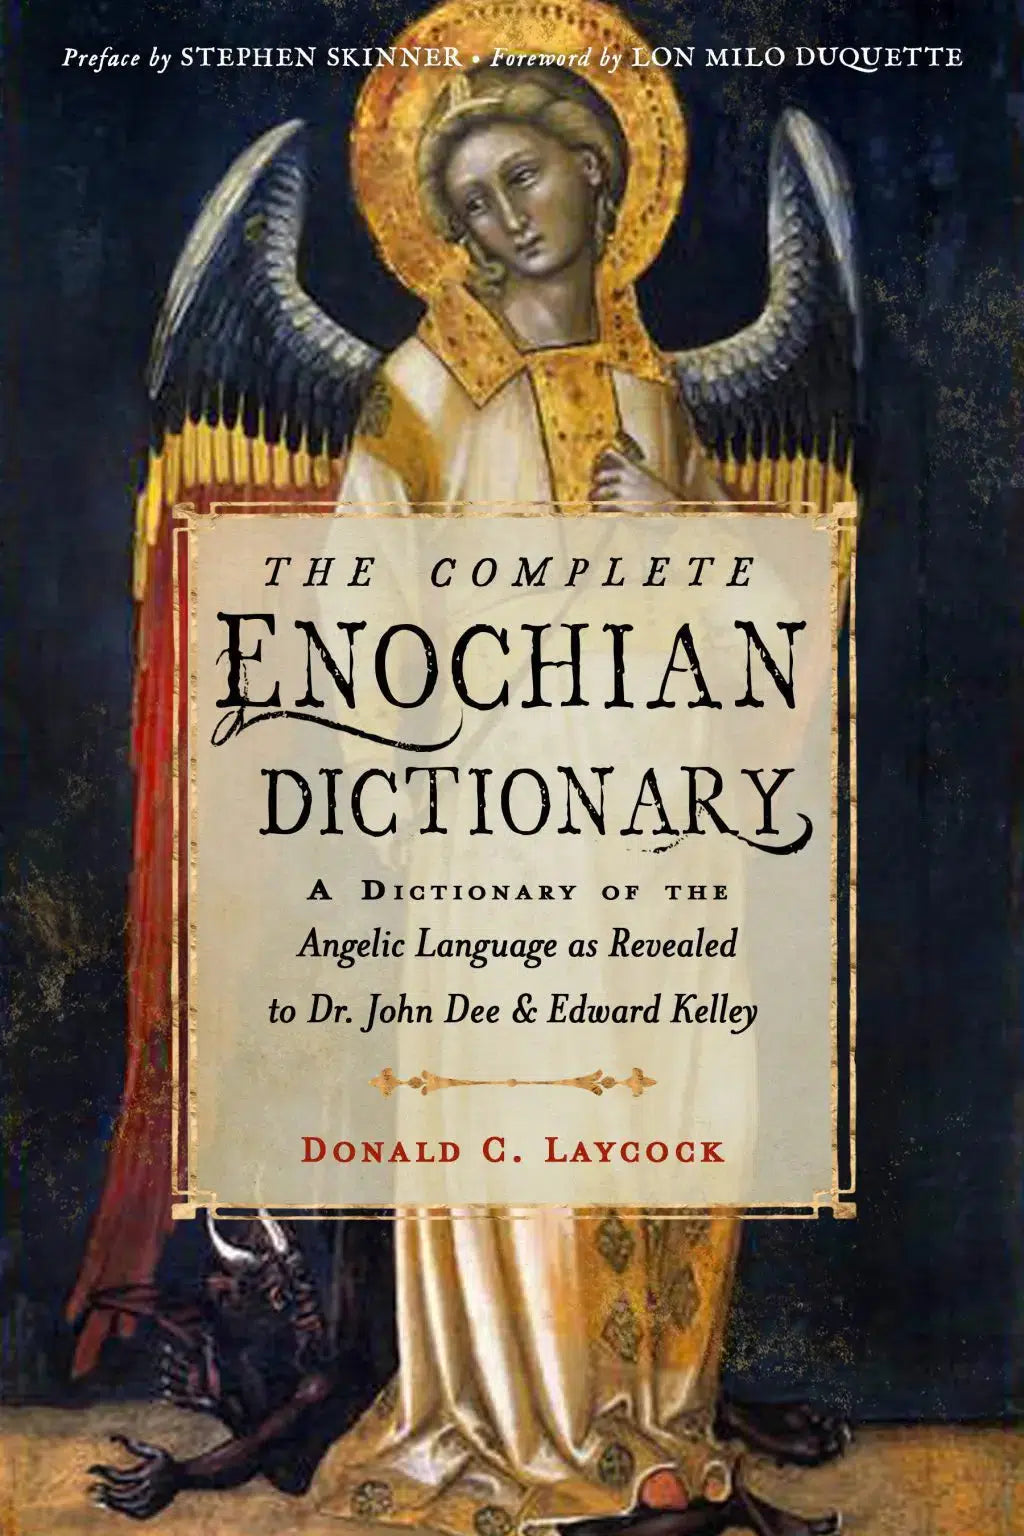 The Complete Enochian Dictionary : A Dictionary of the Angelic Language as Revealed to Dr. John Dee and Edward kelley